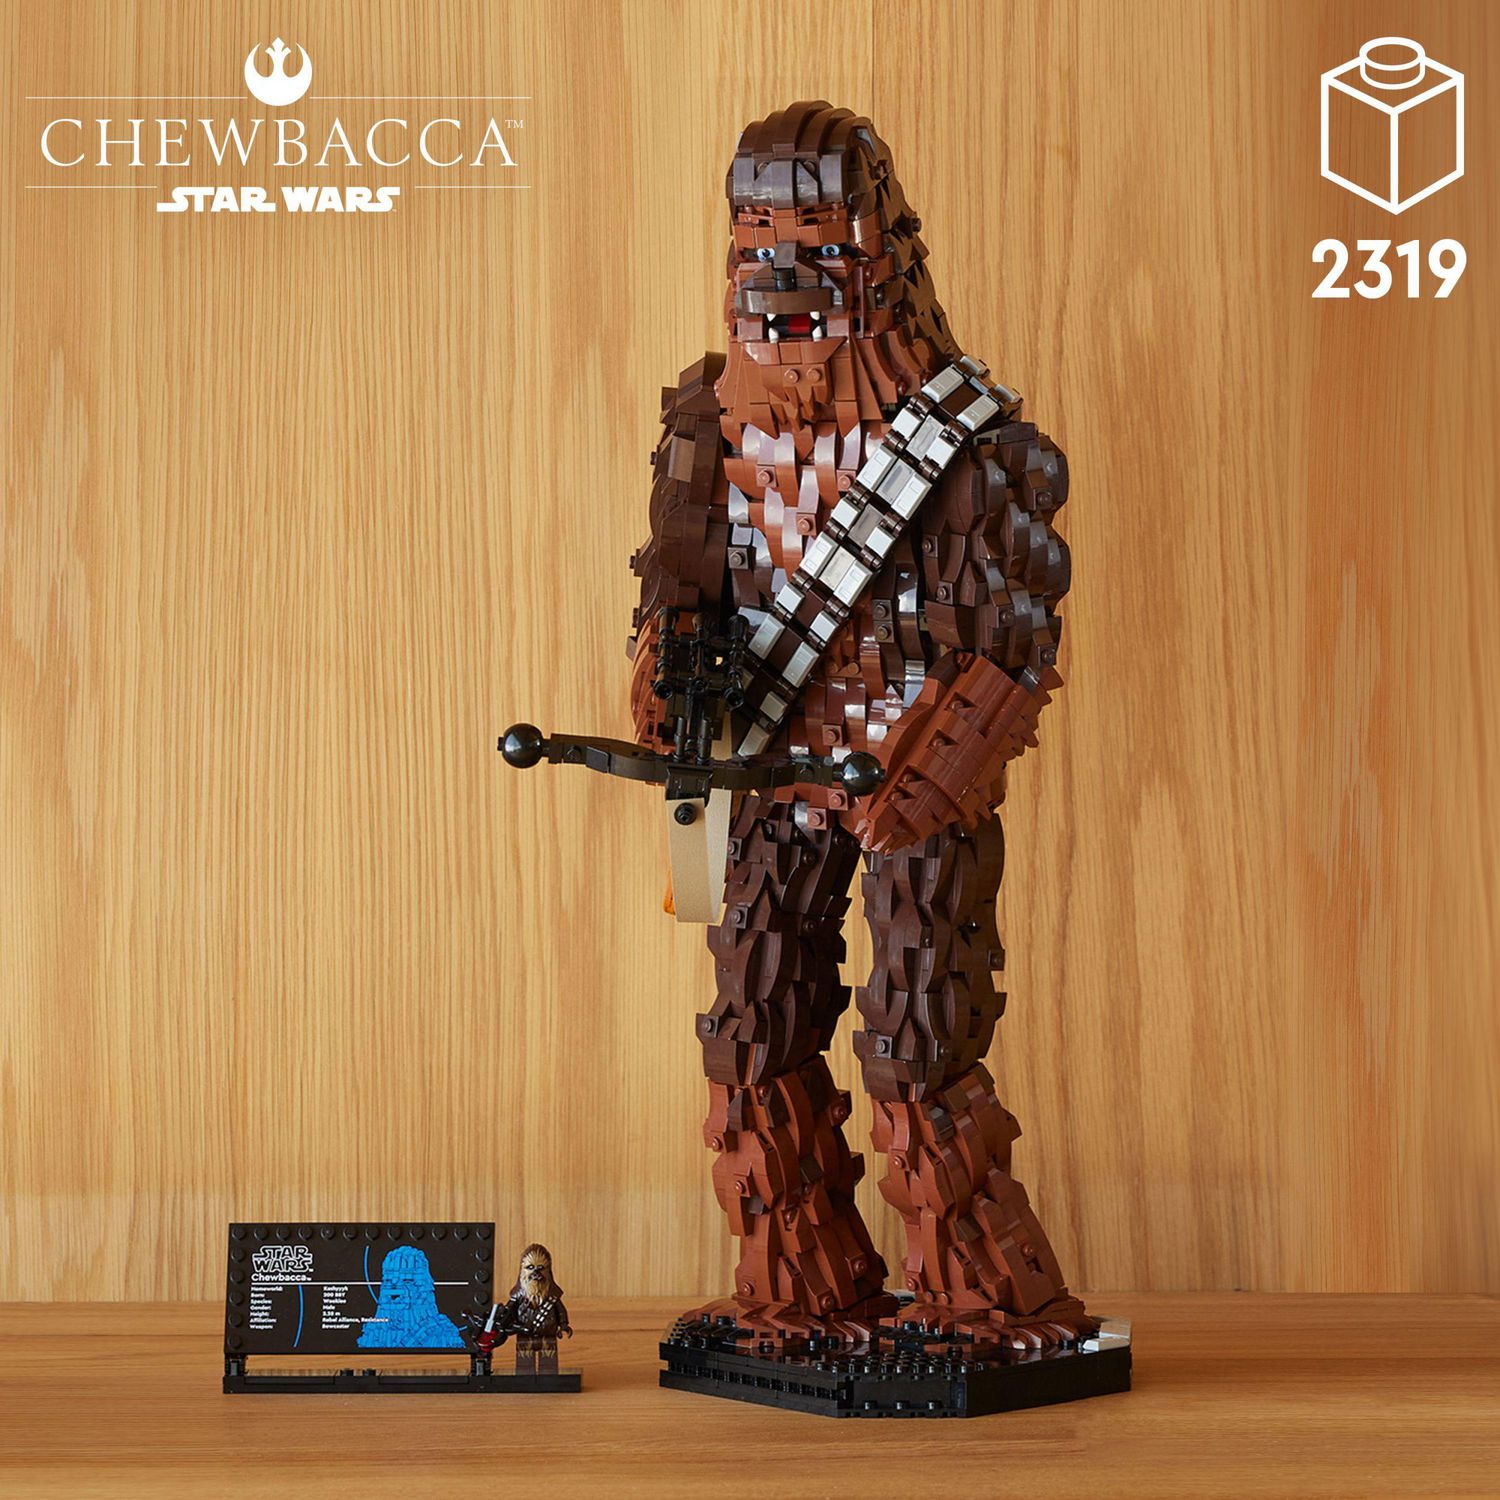 LEGO Star Wars Chewbacca, Buildable May the 4th Collectibles for